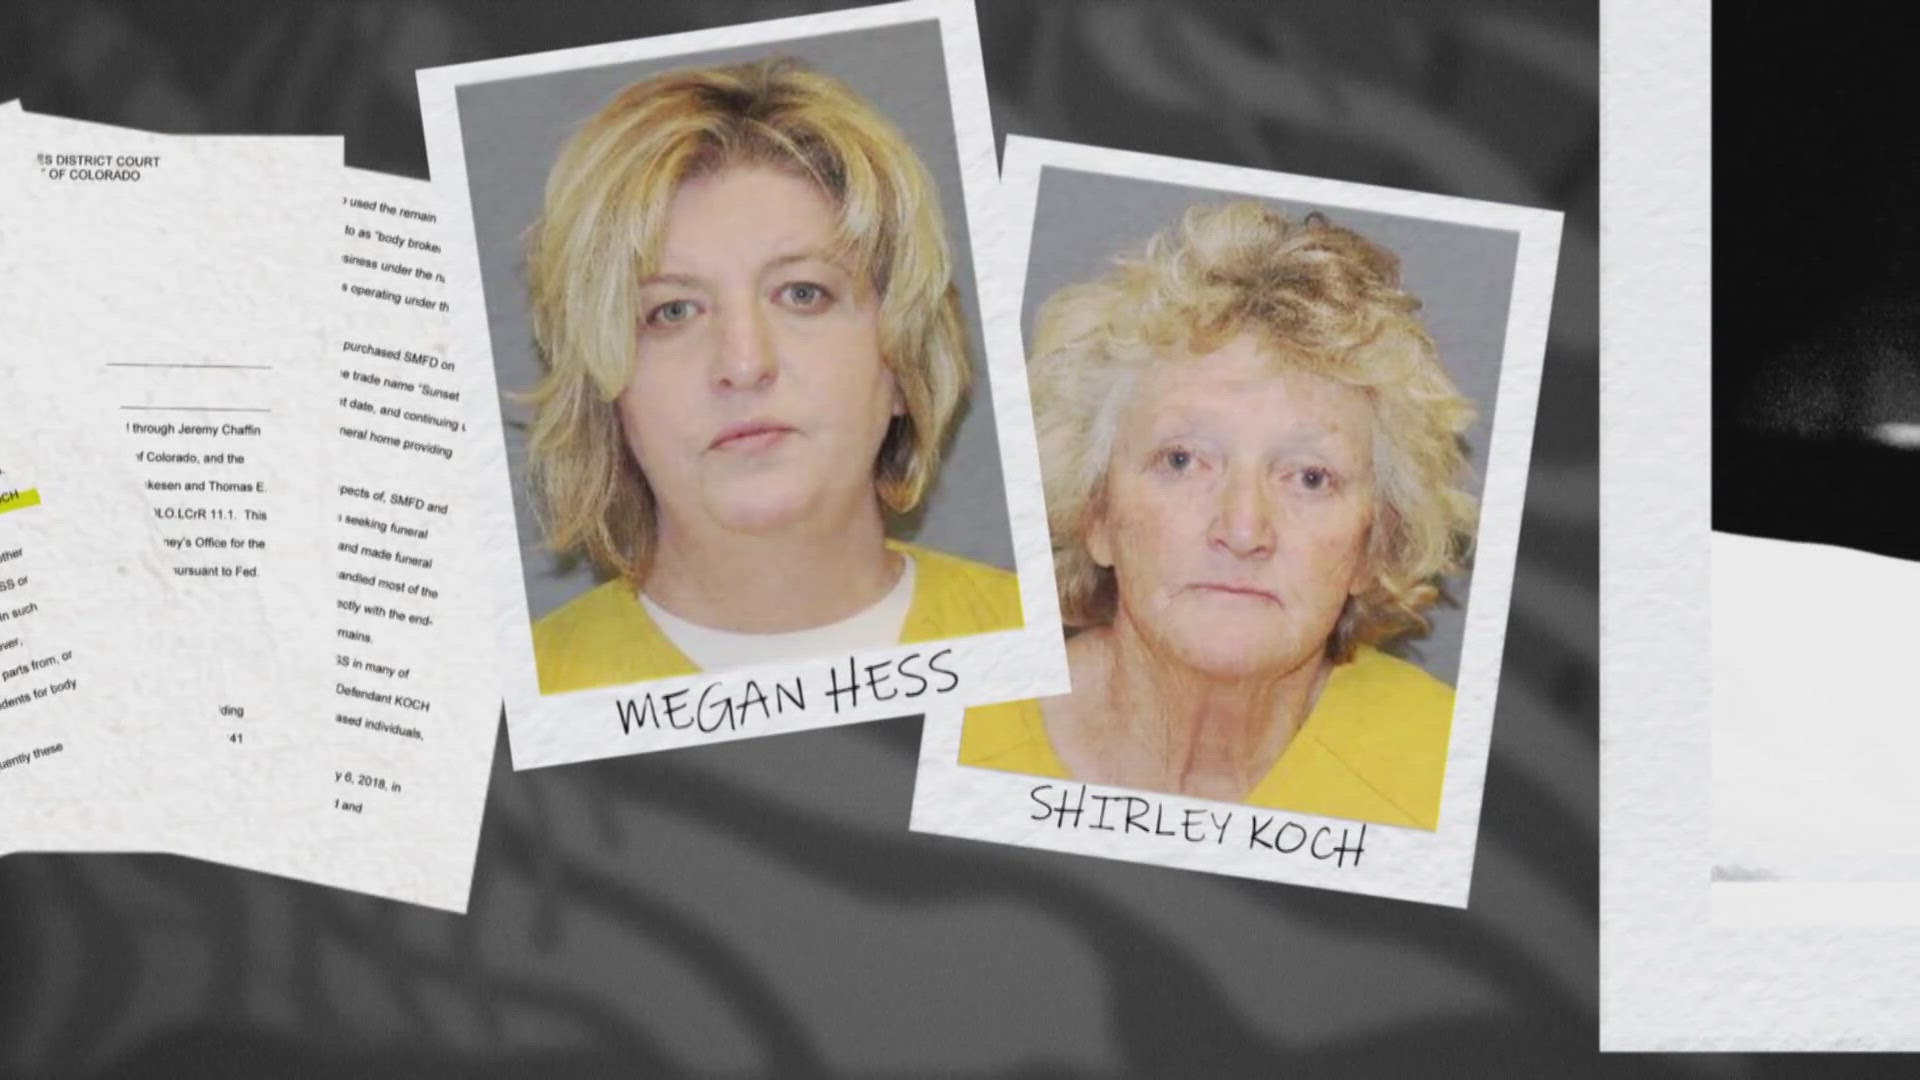 Megan Hess and Shirley Koch pleaded guilty to mail fraud after selling body parts without the families' permission.